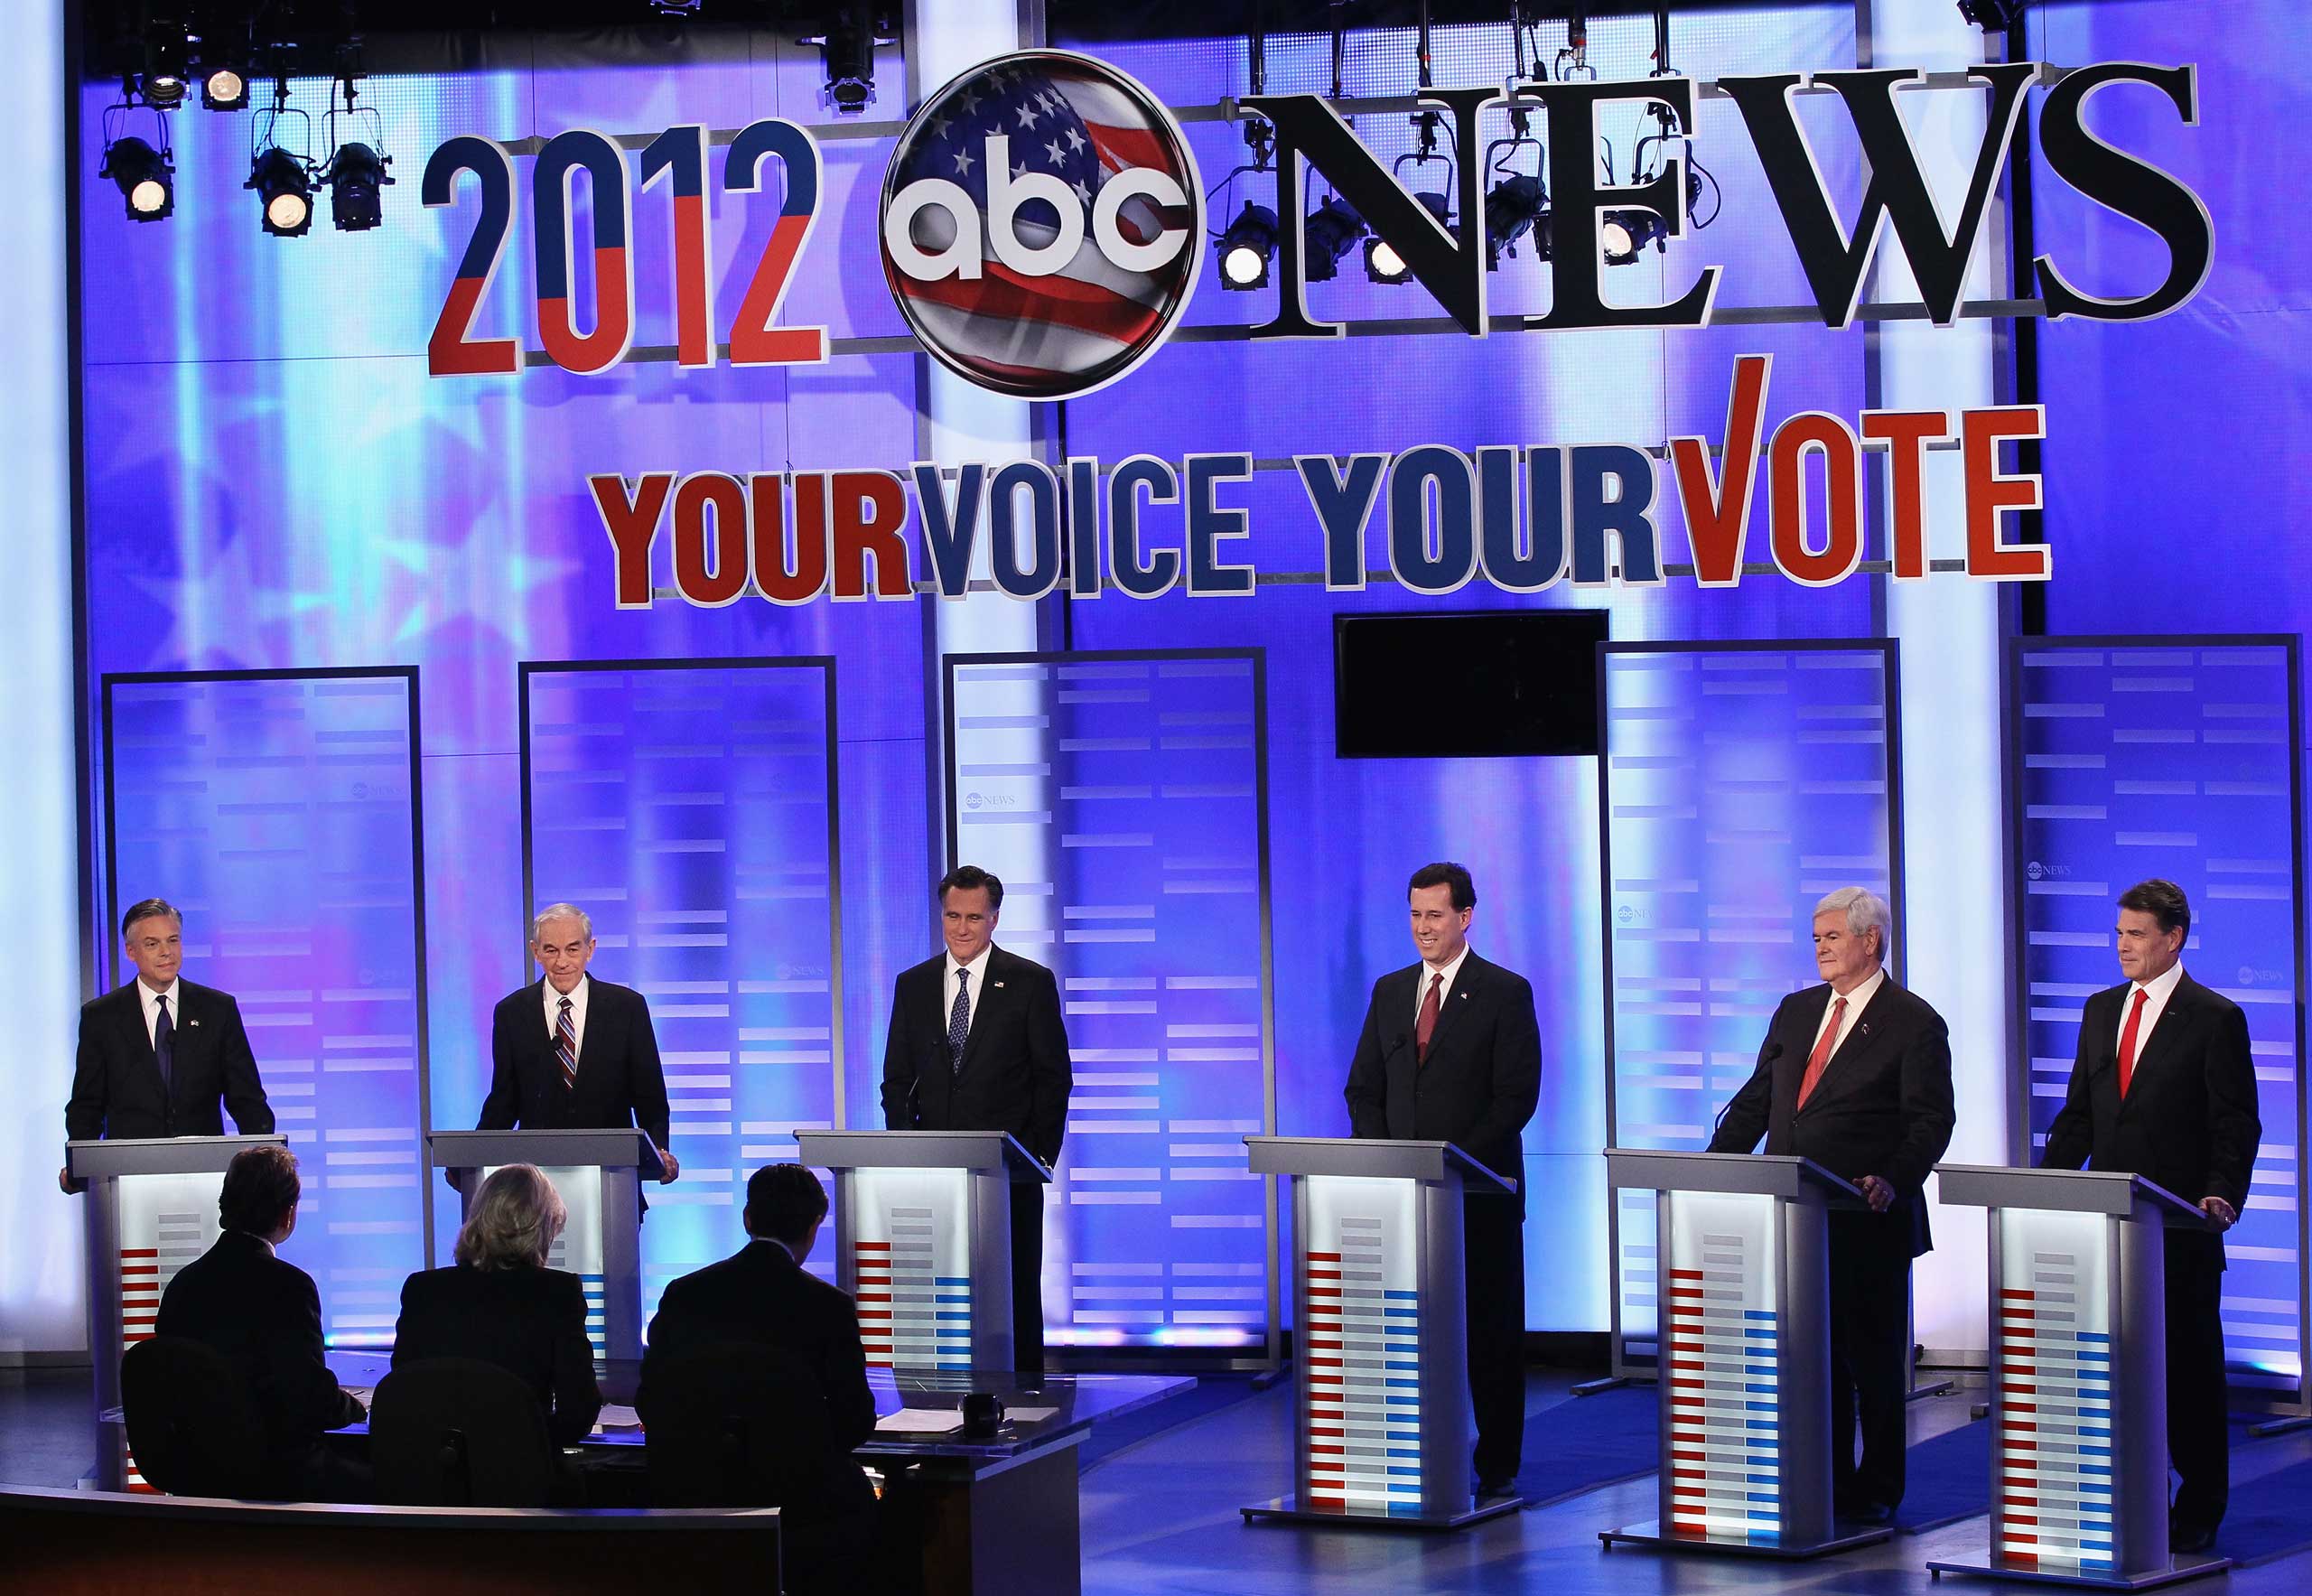 Republican presidential candidates are introduced during the ABC News, Yahoo! News, and WMUR Republican Presidential Debate at Saint Anselm College in Manchester, N.H. on Jan. 7, 2012.